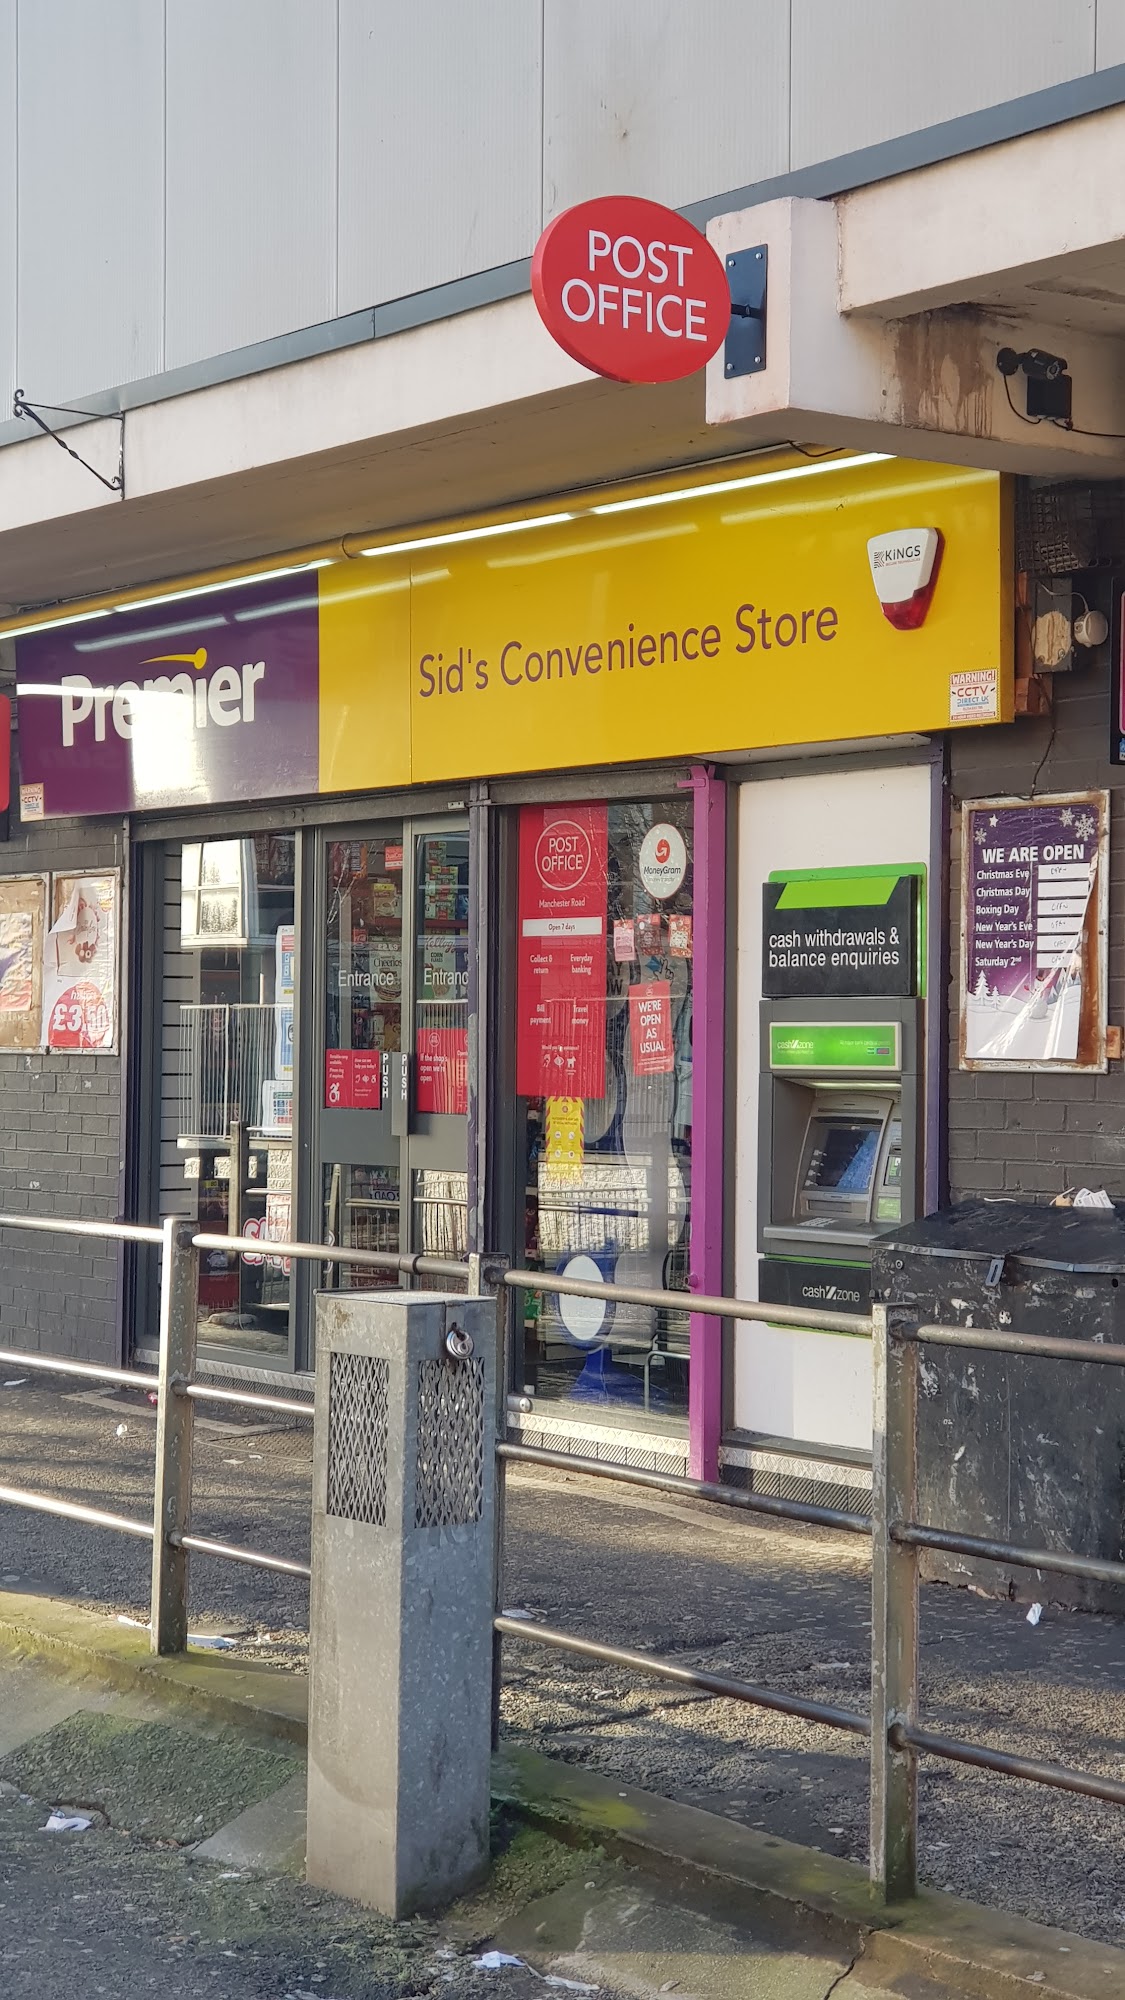 Premier Sid's Convenience Store Post Office